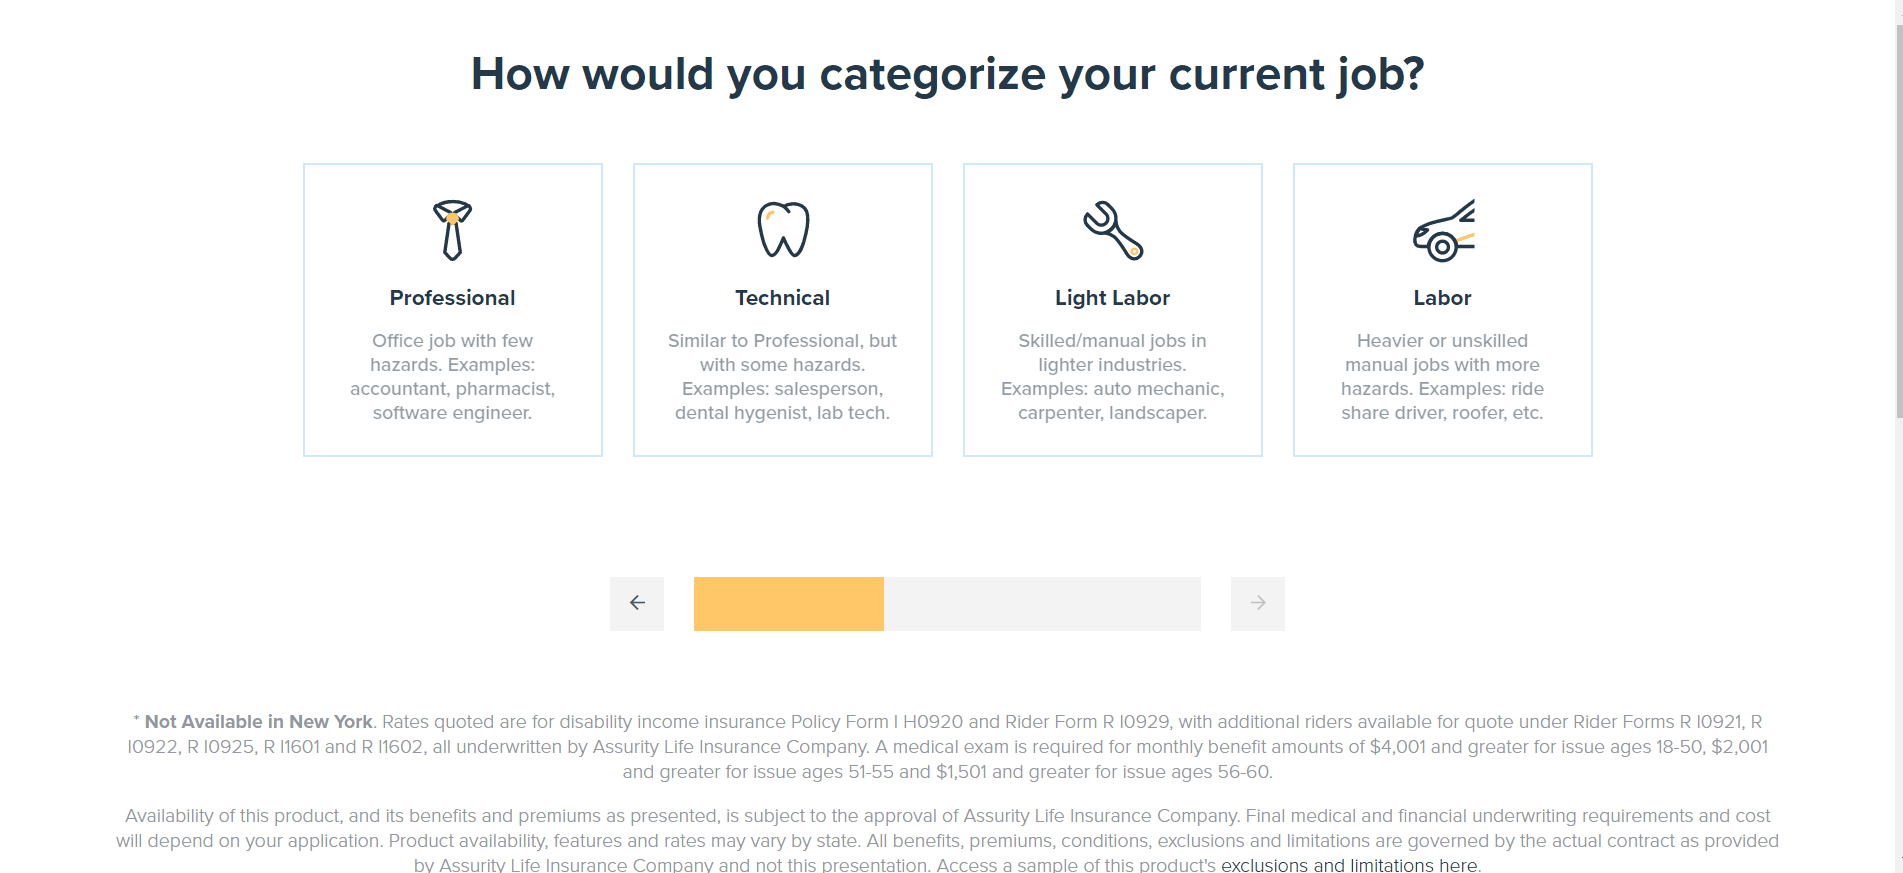 Breeze Review: My Experience Using Breeze - How would you categorize your current job?